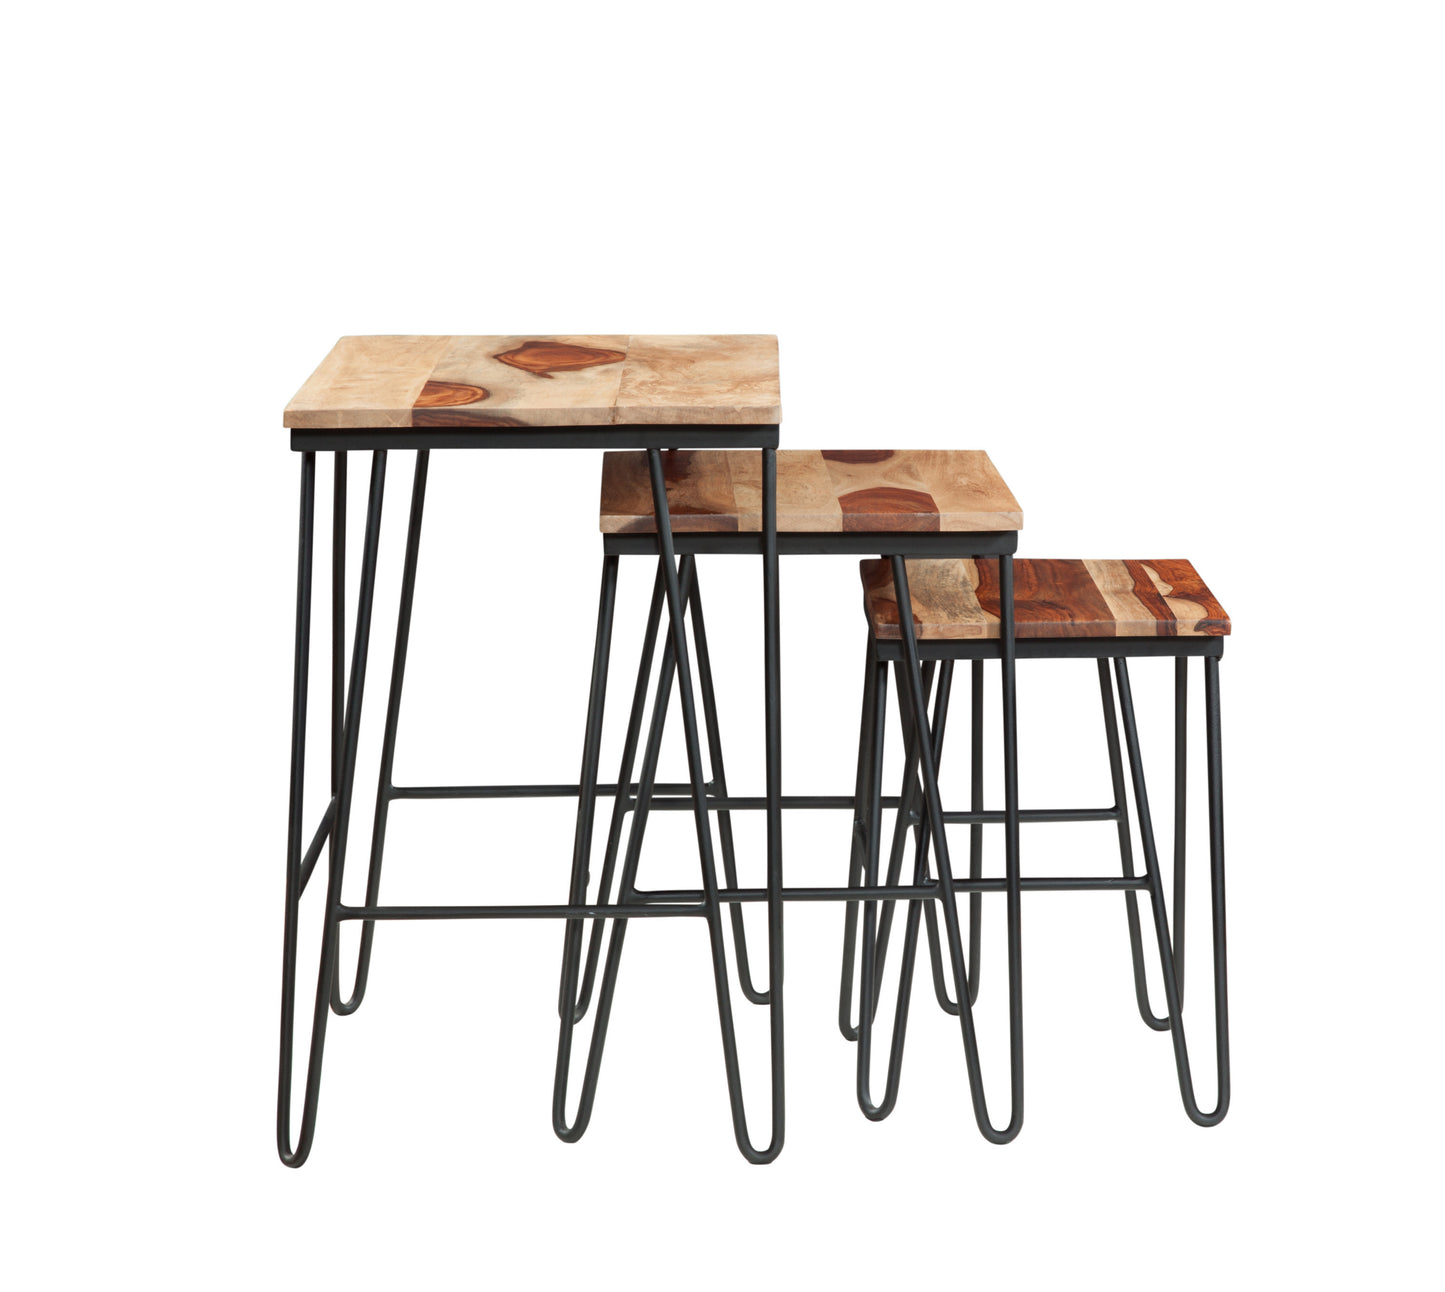 Natural Sheesham Wood Nesting Tables - Two-Tone Top, Iron Base - Varied Beauty, Ample Storage Space